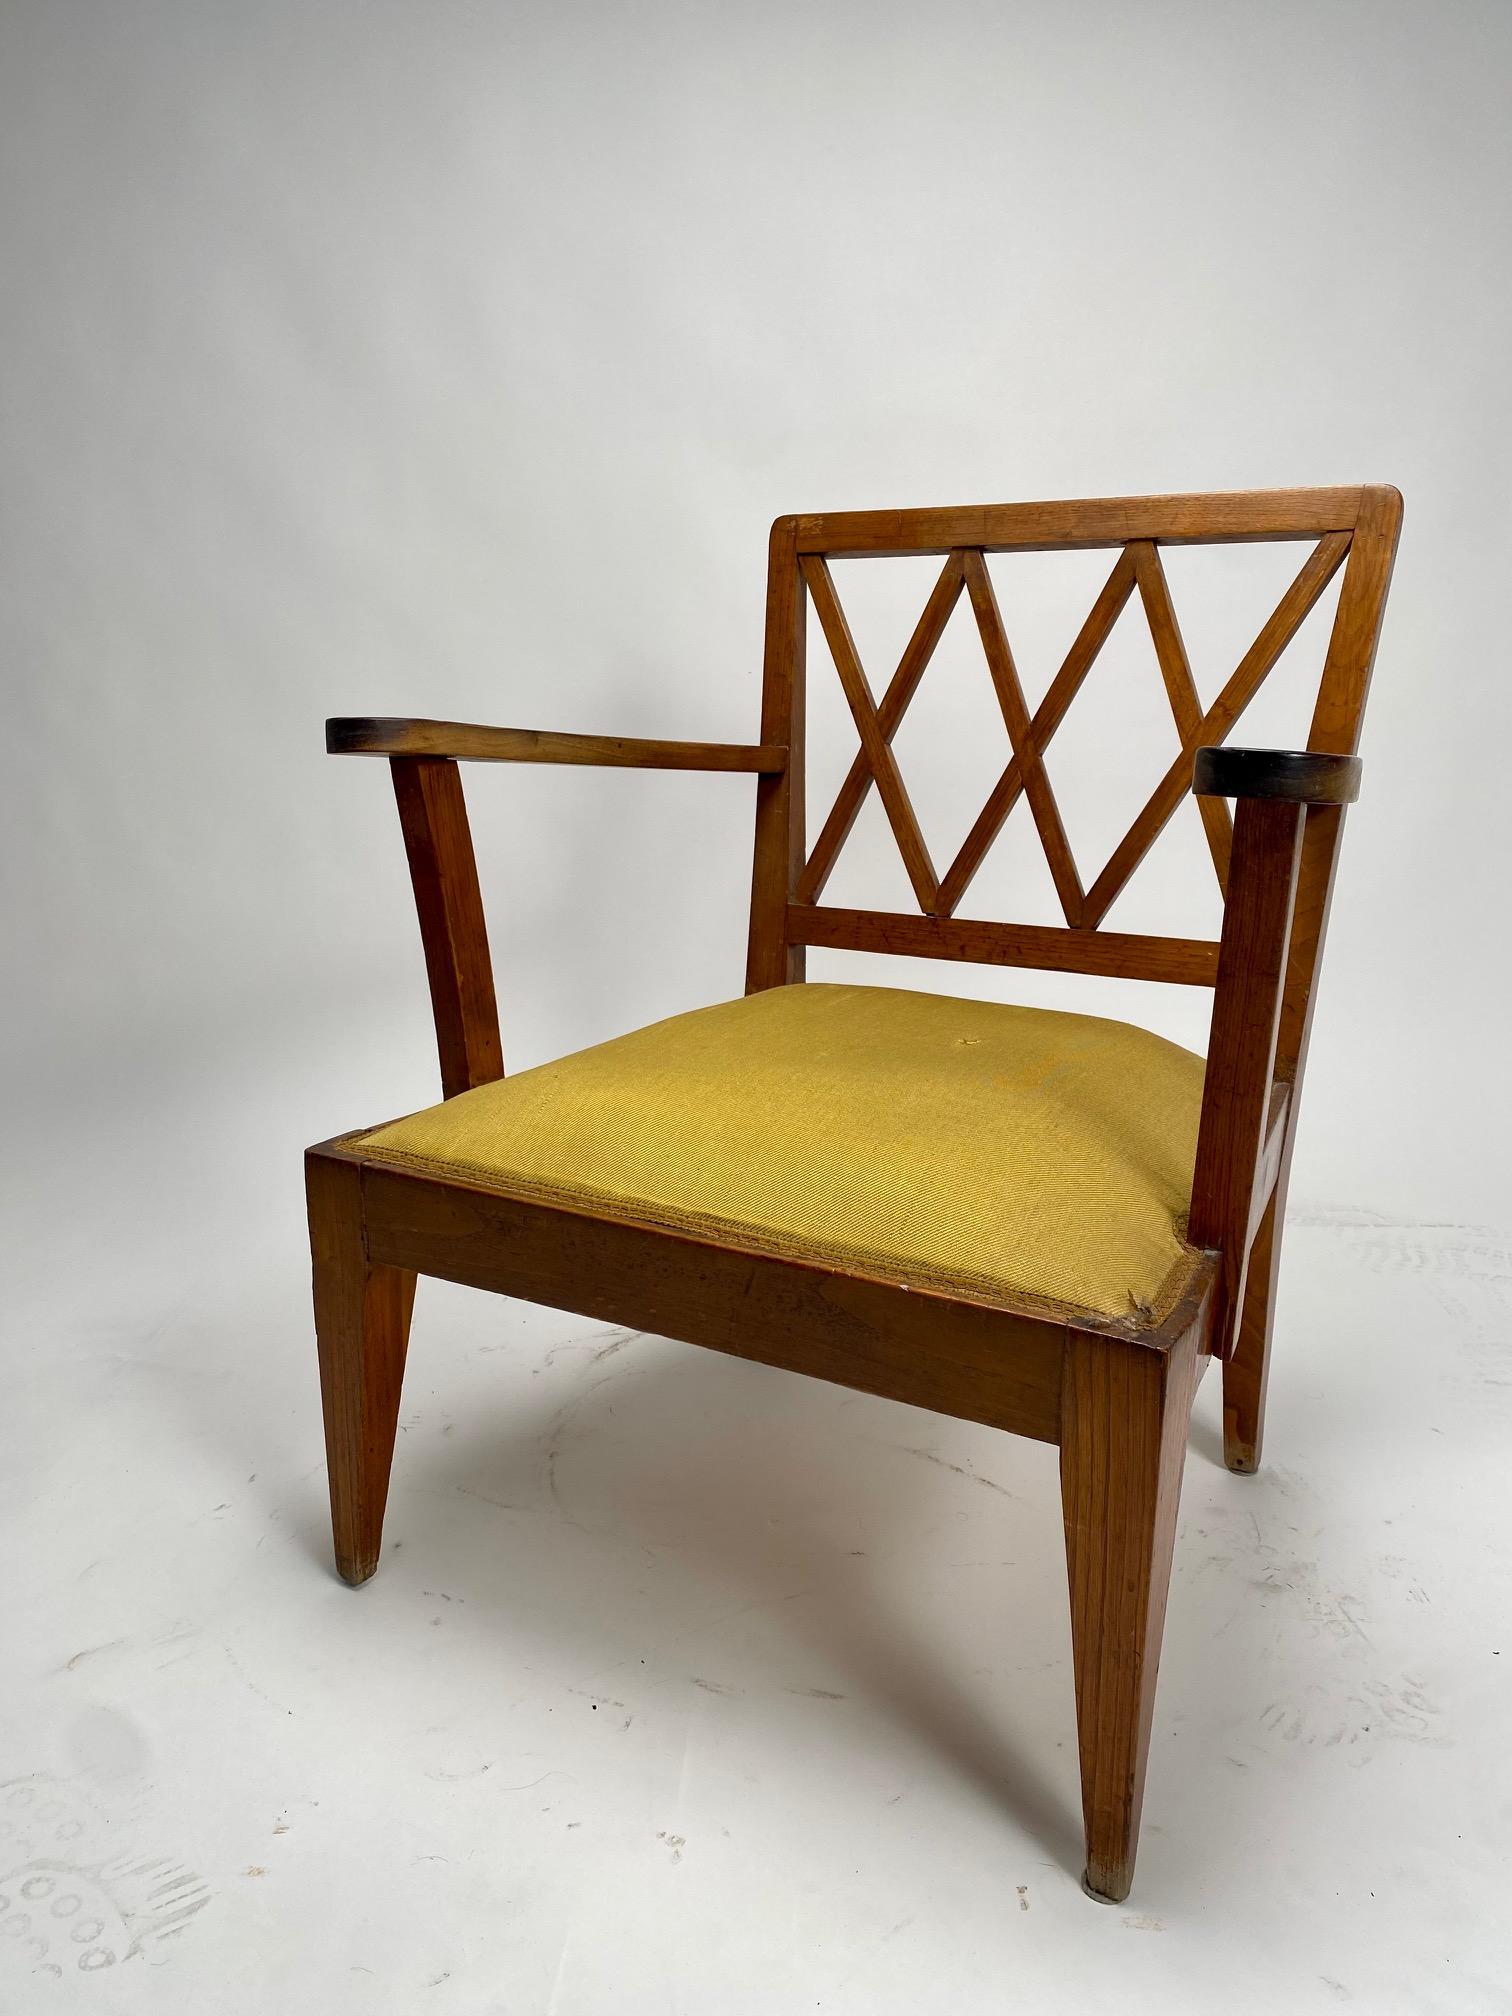 Art Deco Sculptural wooden Armchair, Gio Ponti Style, Italy, 1930s For Sale